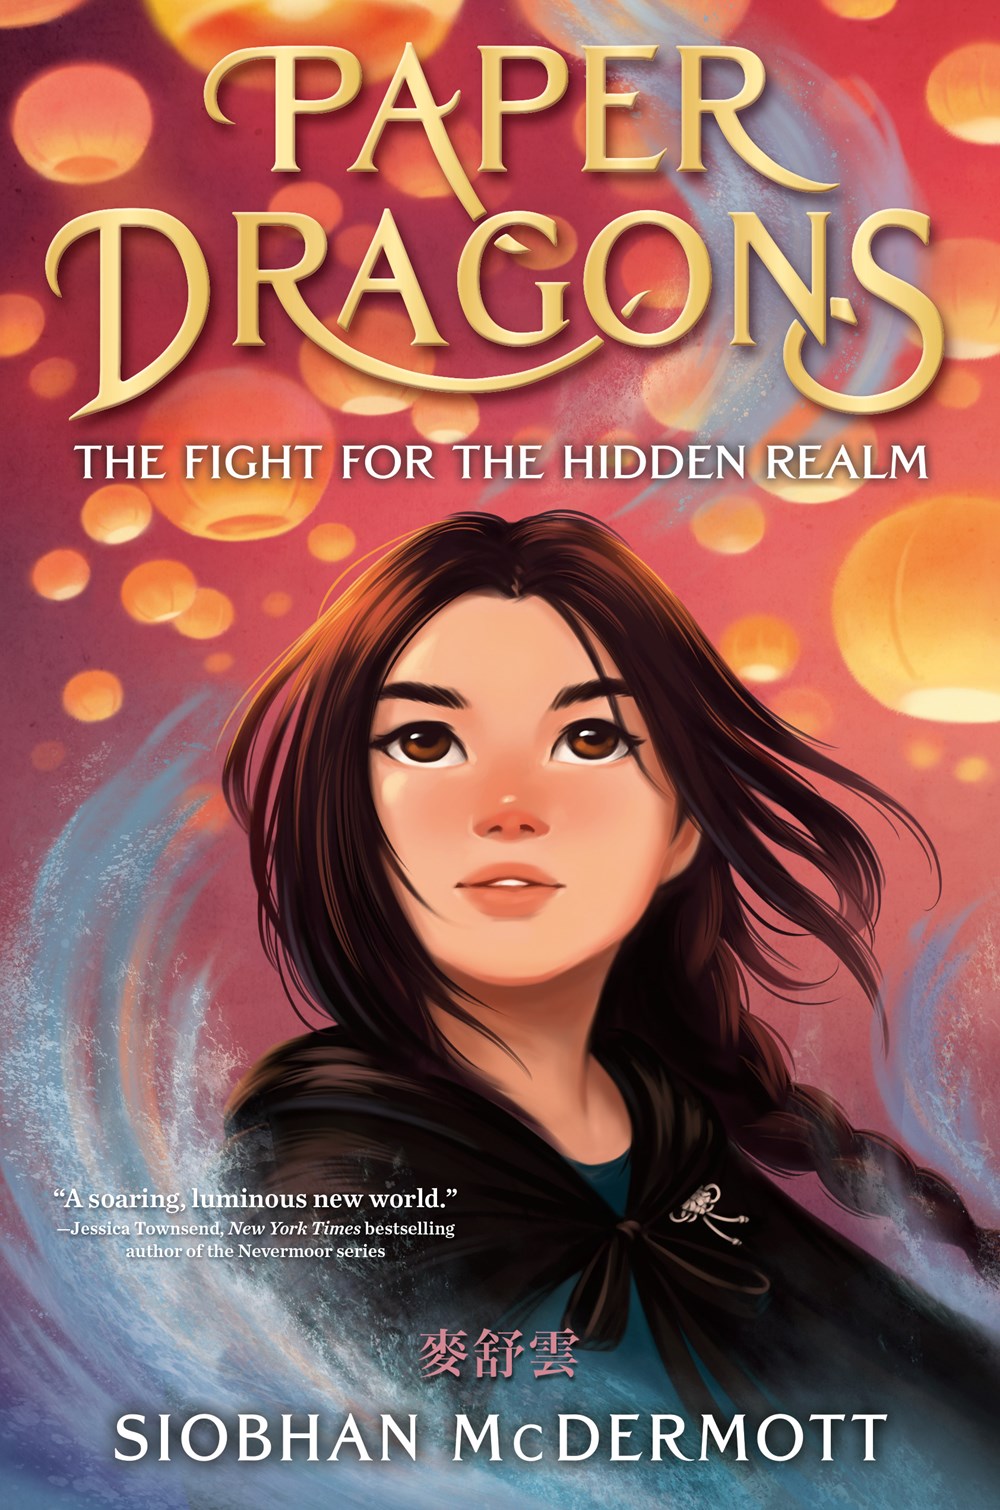 Cover of Paper Dragons by Siobhan McDermott